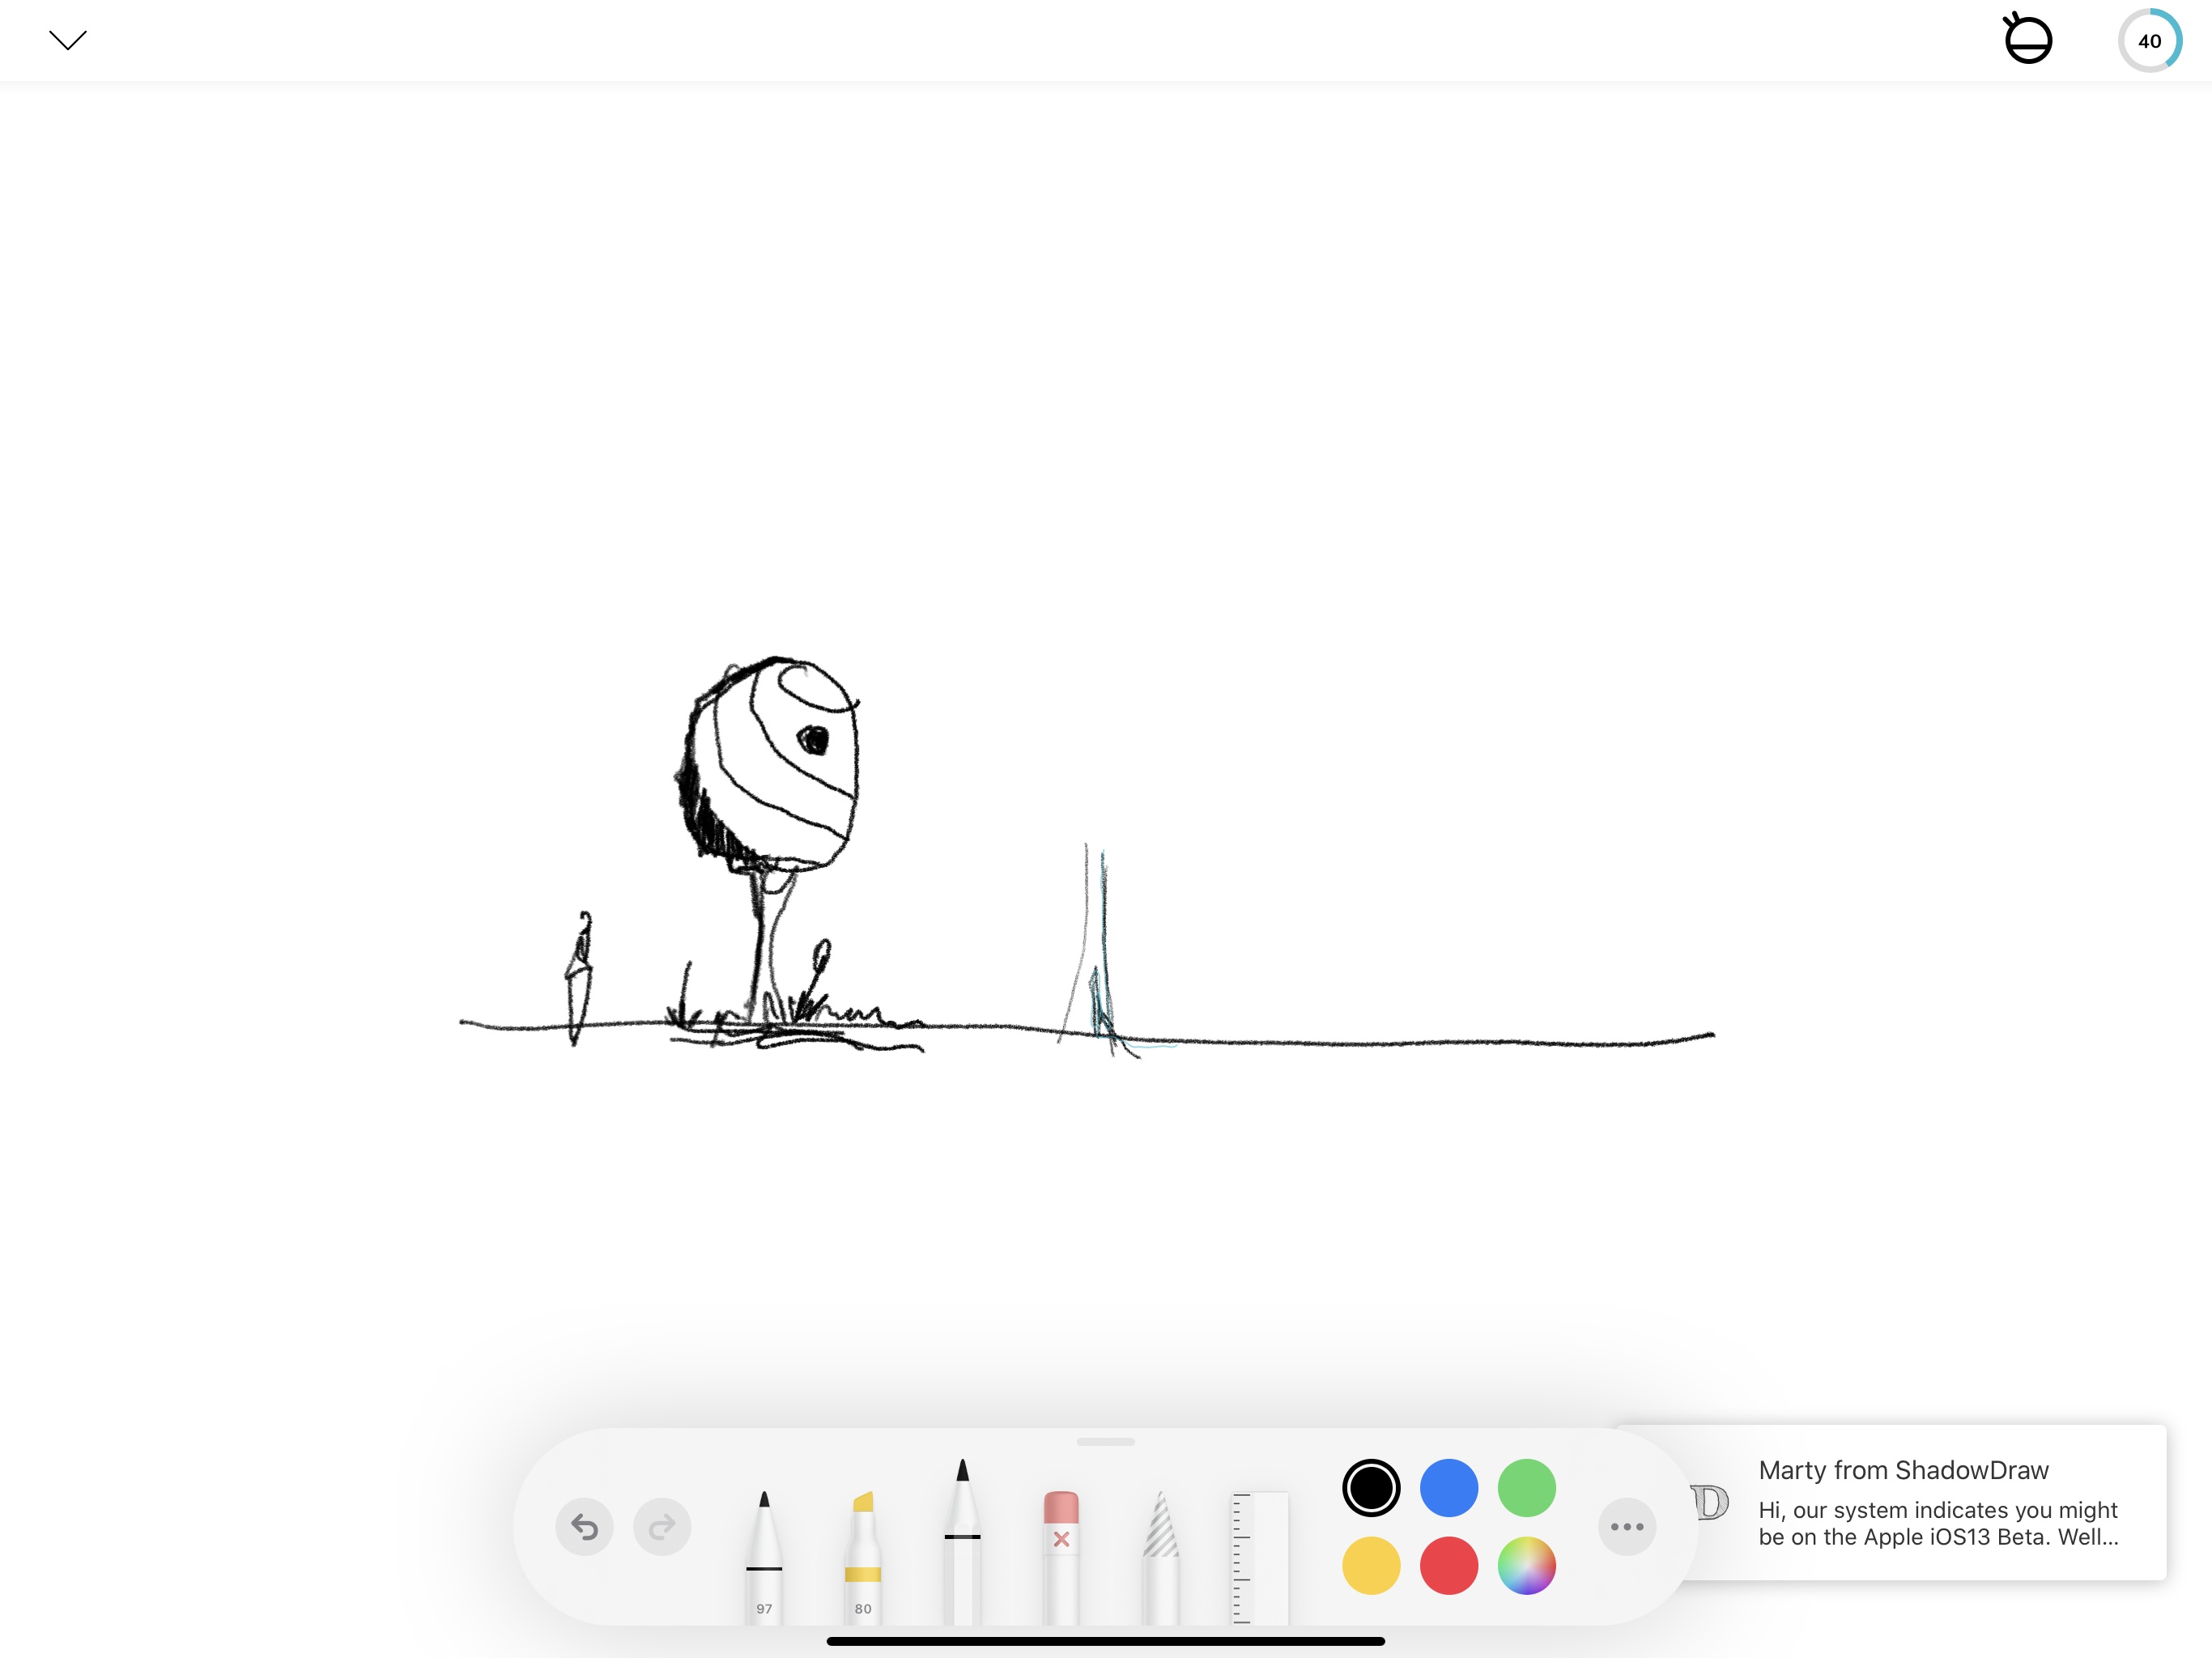 The latest version of ShadowDraw implements PencilKit support for sketching in the app.